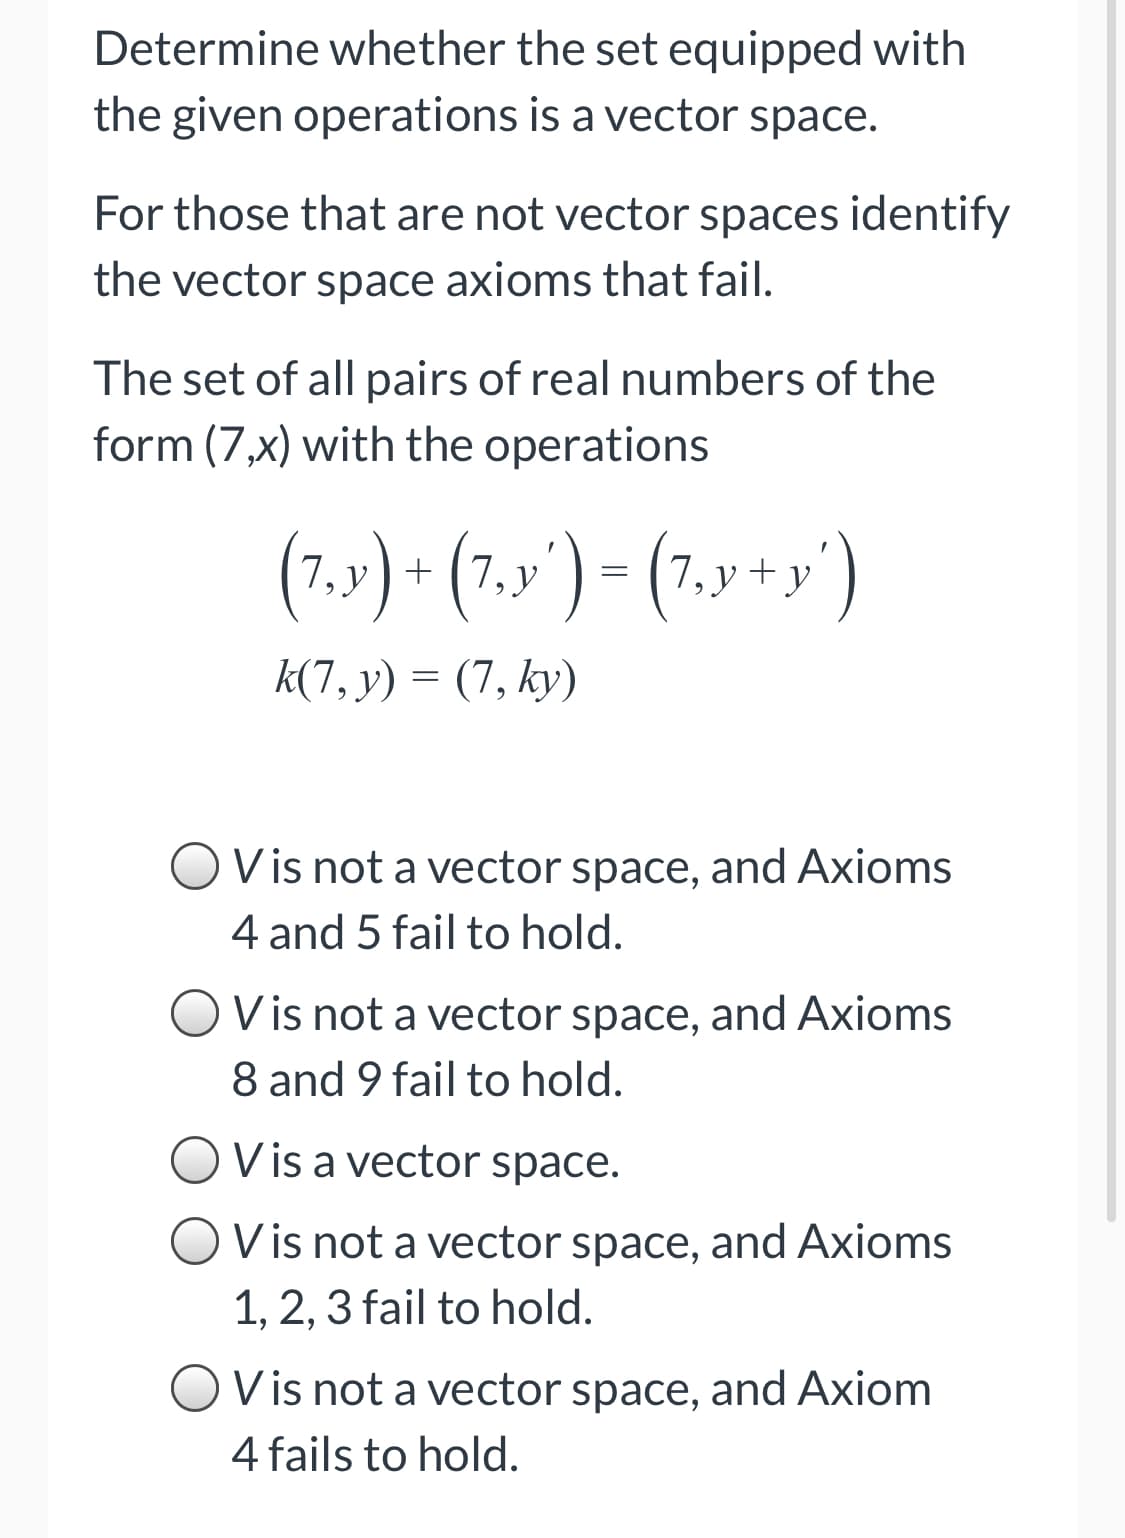 Determine whether the set equipped with
the given operations is a vector space.
For those that are not vector spaces identify
the vector space axioms that fail.
The set of all pairs of real numbers of the
form (7,x) with the operations
(7.v) + (7,»') = (7.y +y')
k(7, y) = (7, ky)
OVis not a vector space, and Axioms
4 and 5 fail to hold.
Vis not a vector space, and Axioms
8 and 9 fail to hold.
V is a vector space.
Vis not a vector space, and Axioms
1, 2, 3 fail to hold.
V is not a vector space, and Axiom
4 fails to hold.
